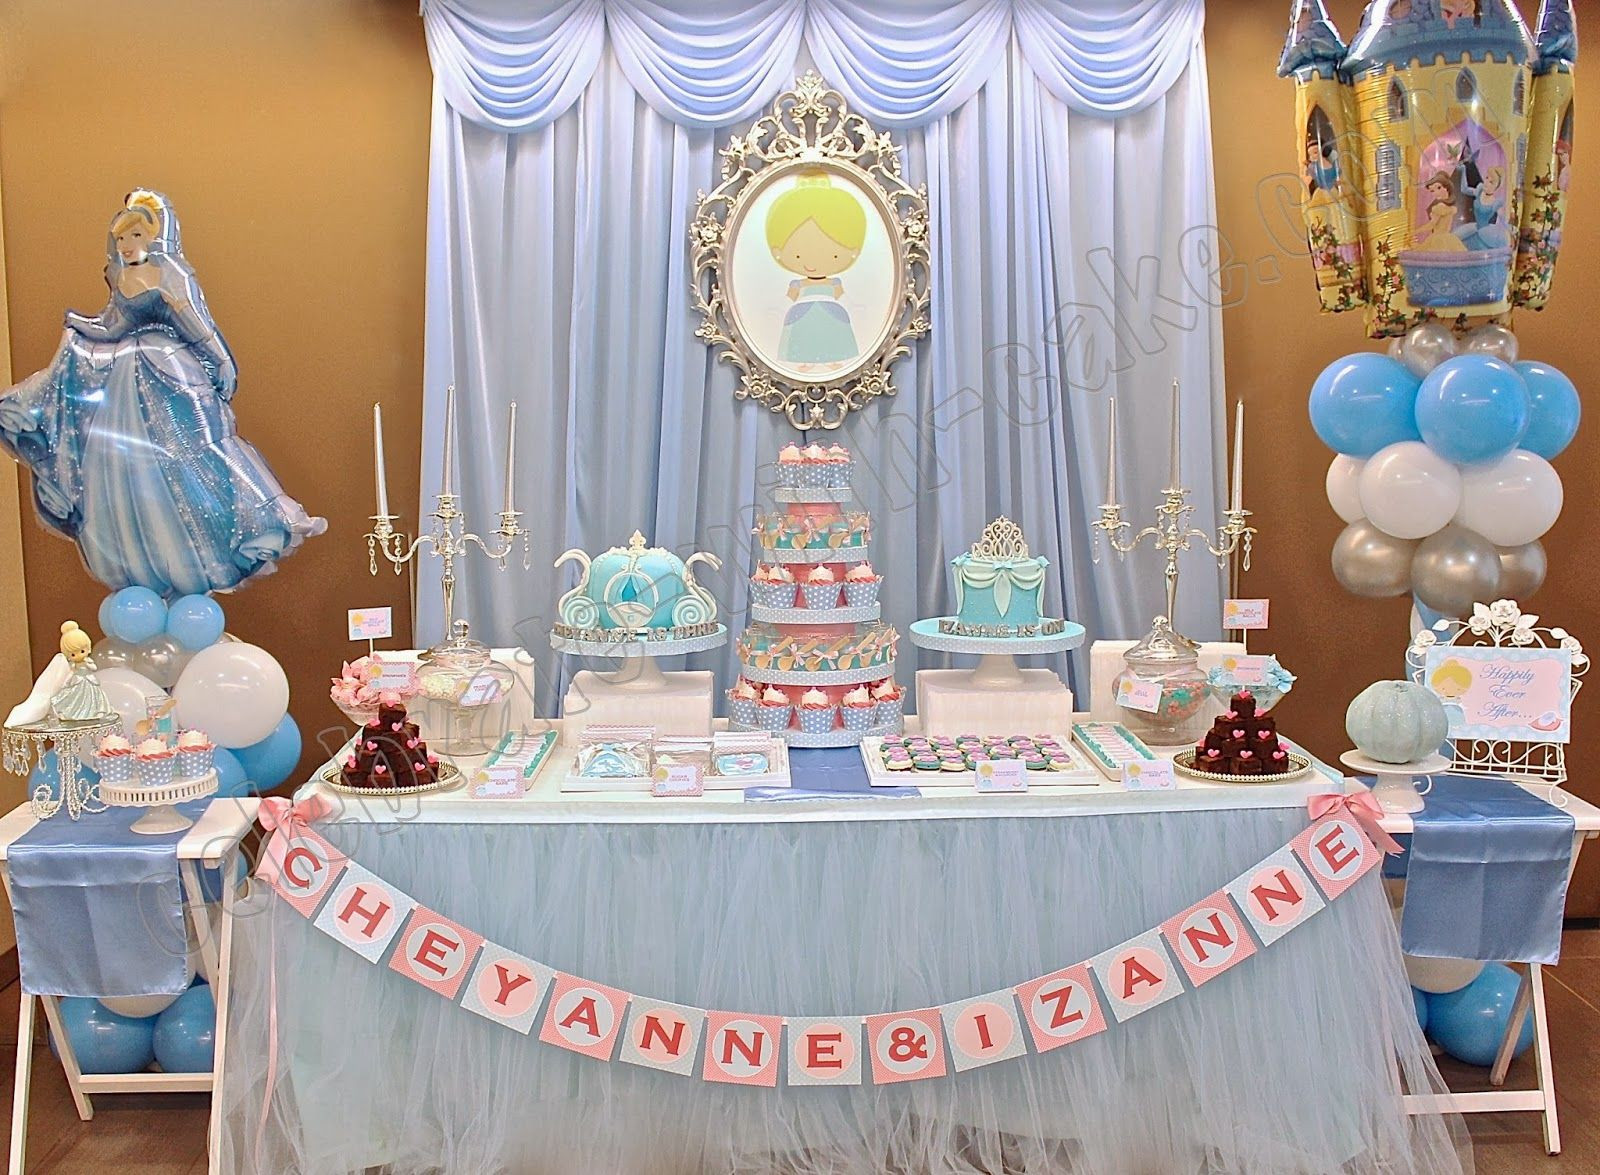 Cake Table Decorations For Birthday
 Celebrate with Cake Cinderella Dessert Table